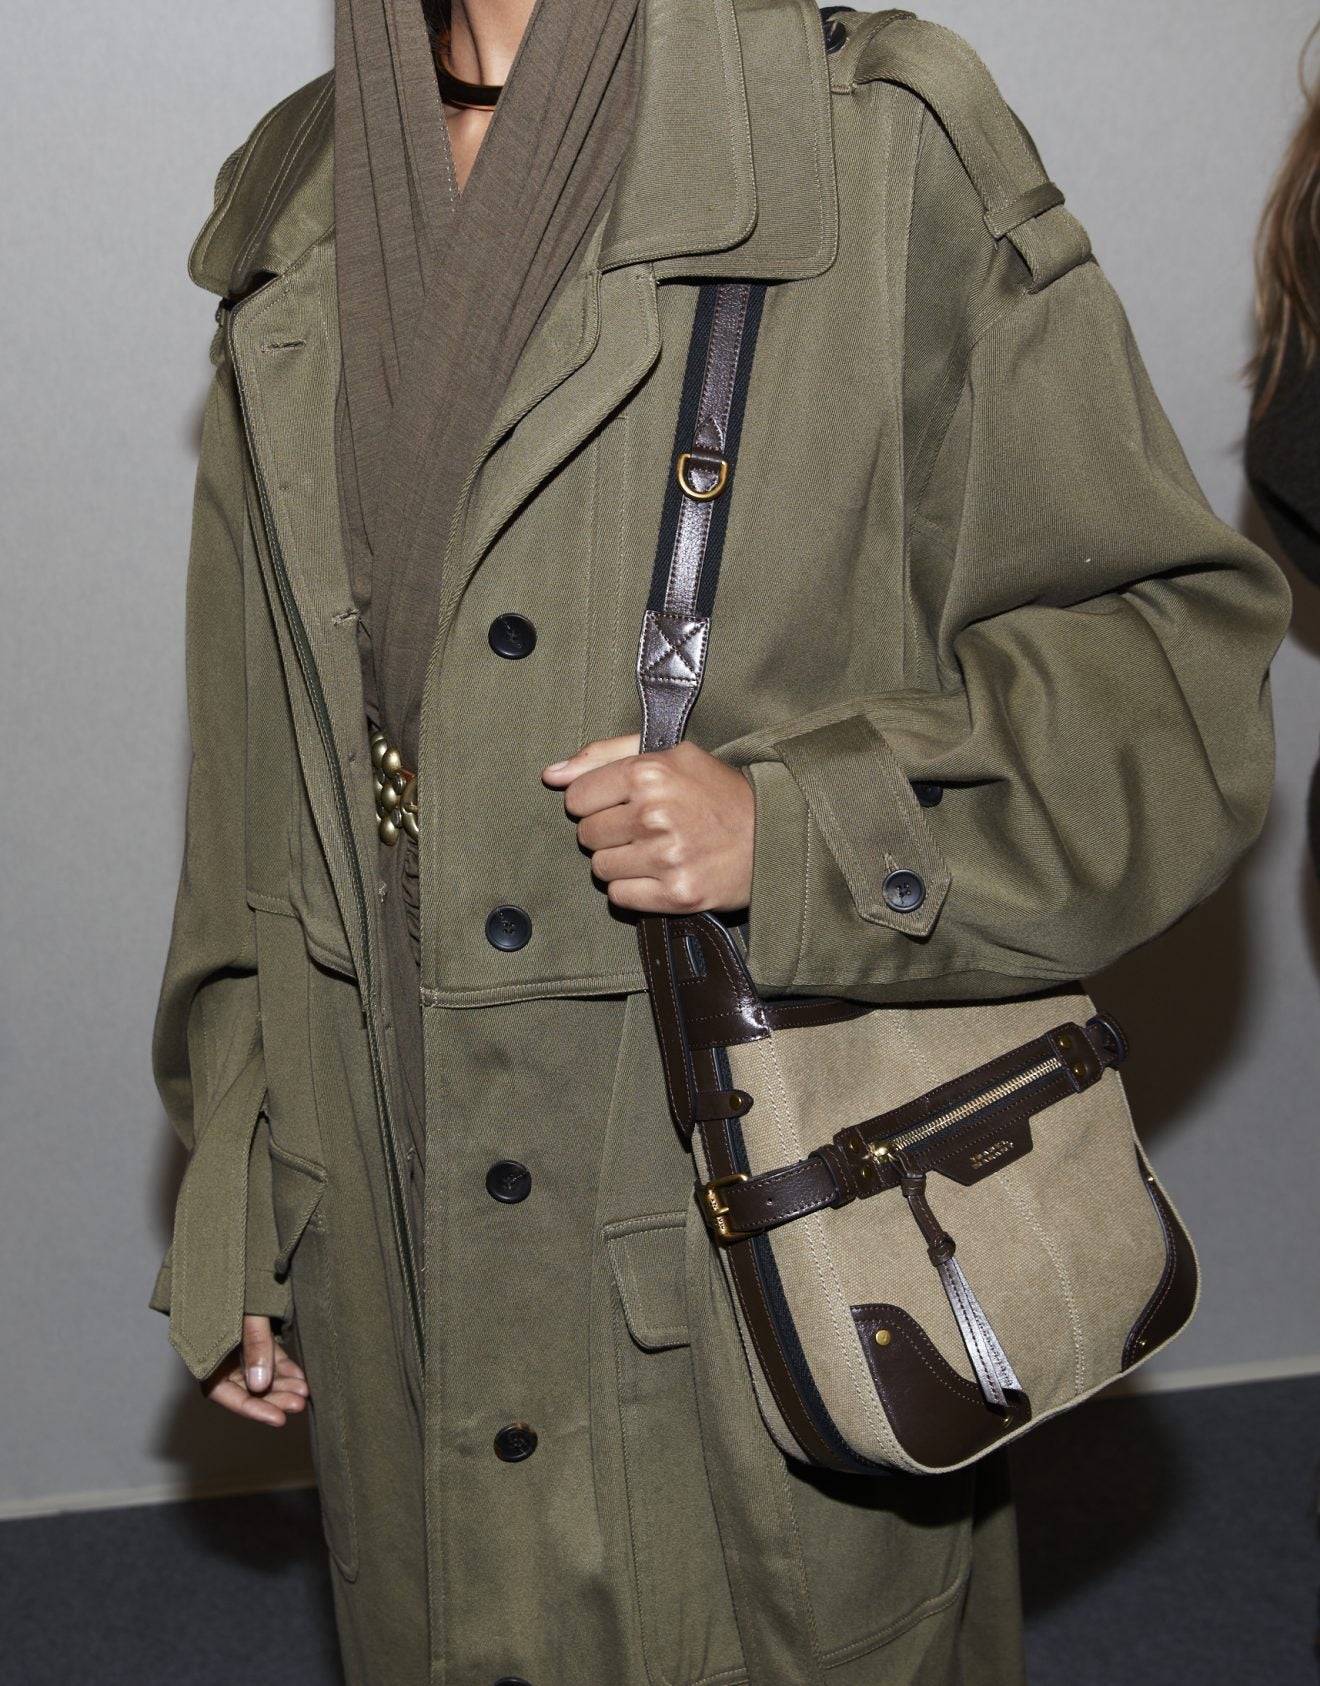 Backstage image of a model’s midsection dressed in an oversized khaki trench and carrying a tan messenger bag with dark brown leather trim. 